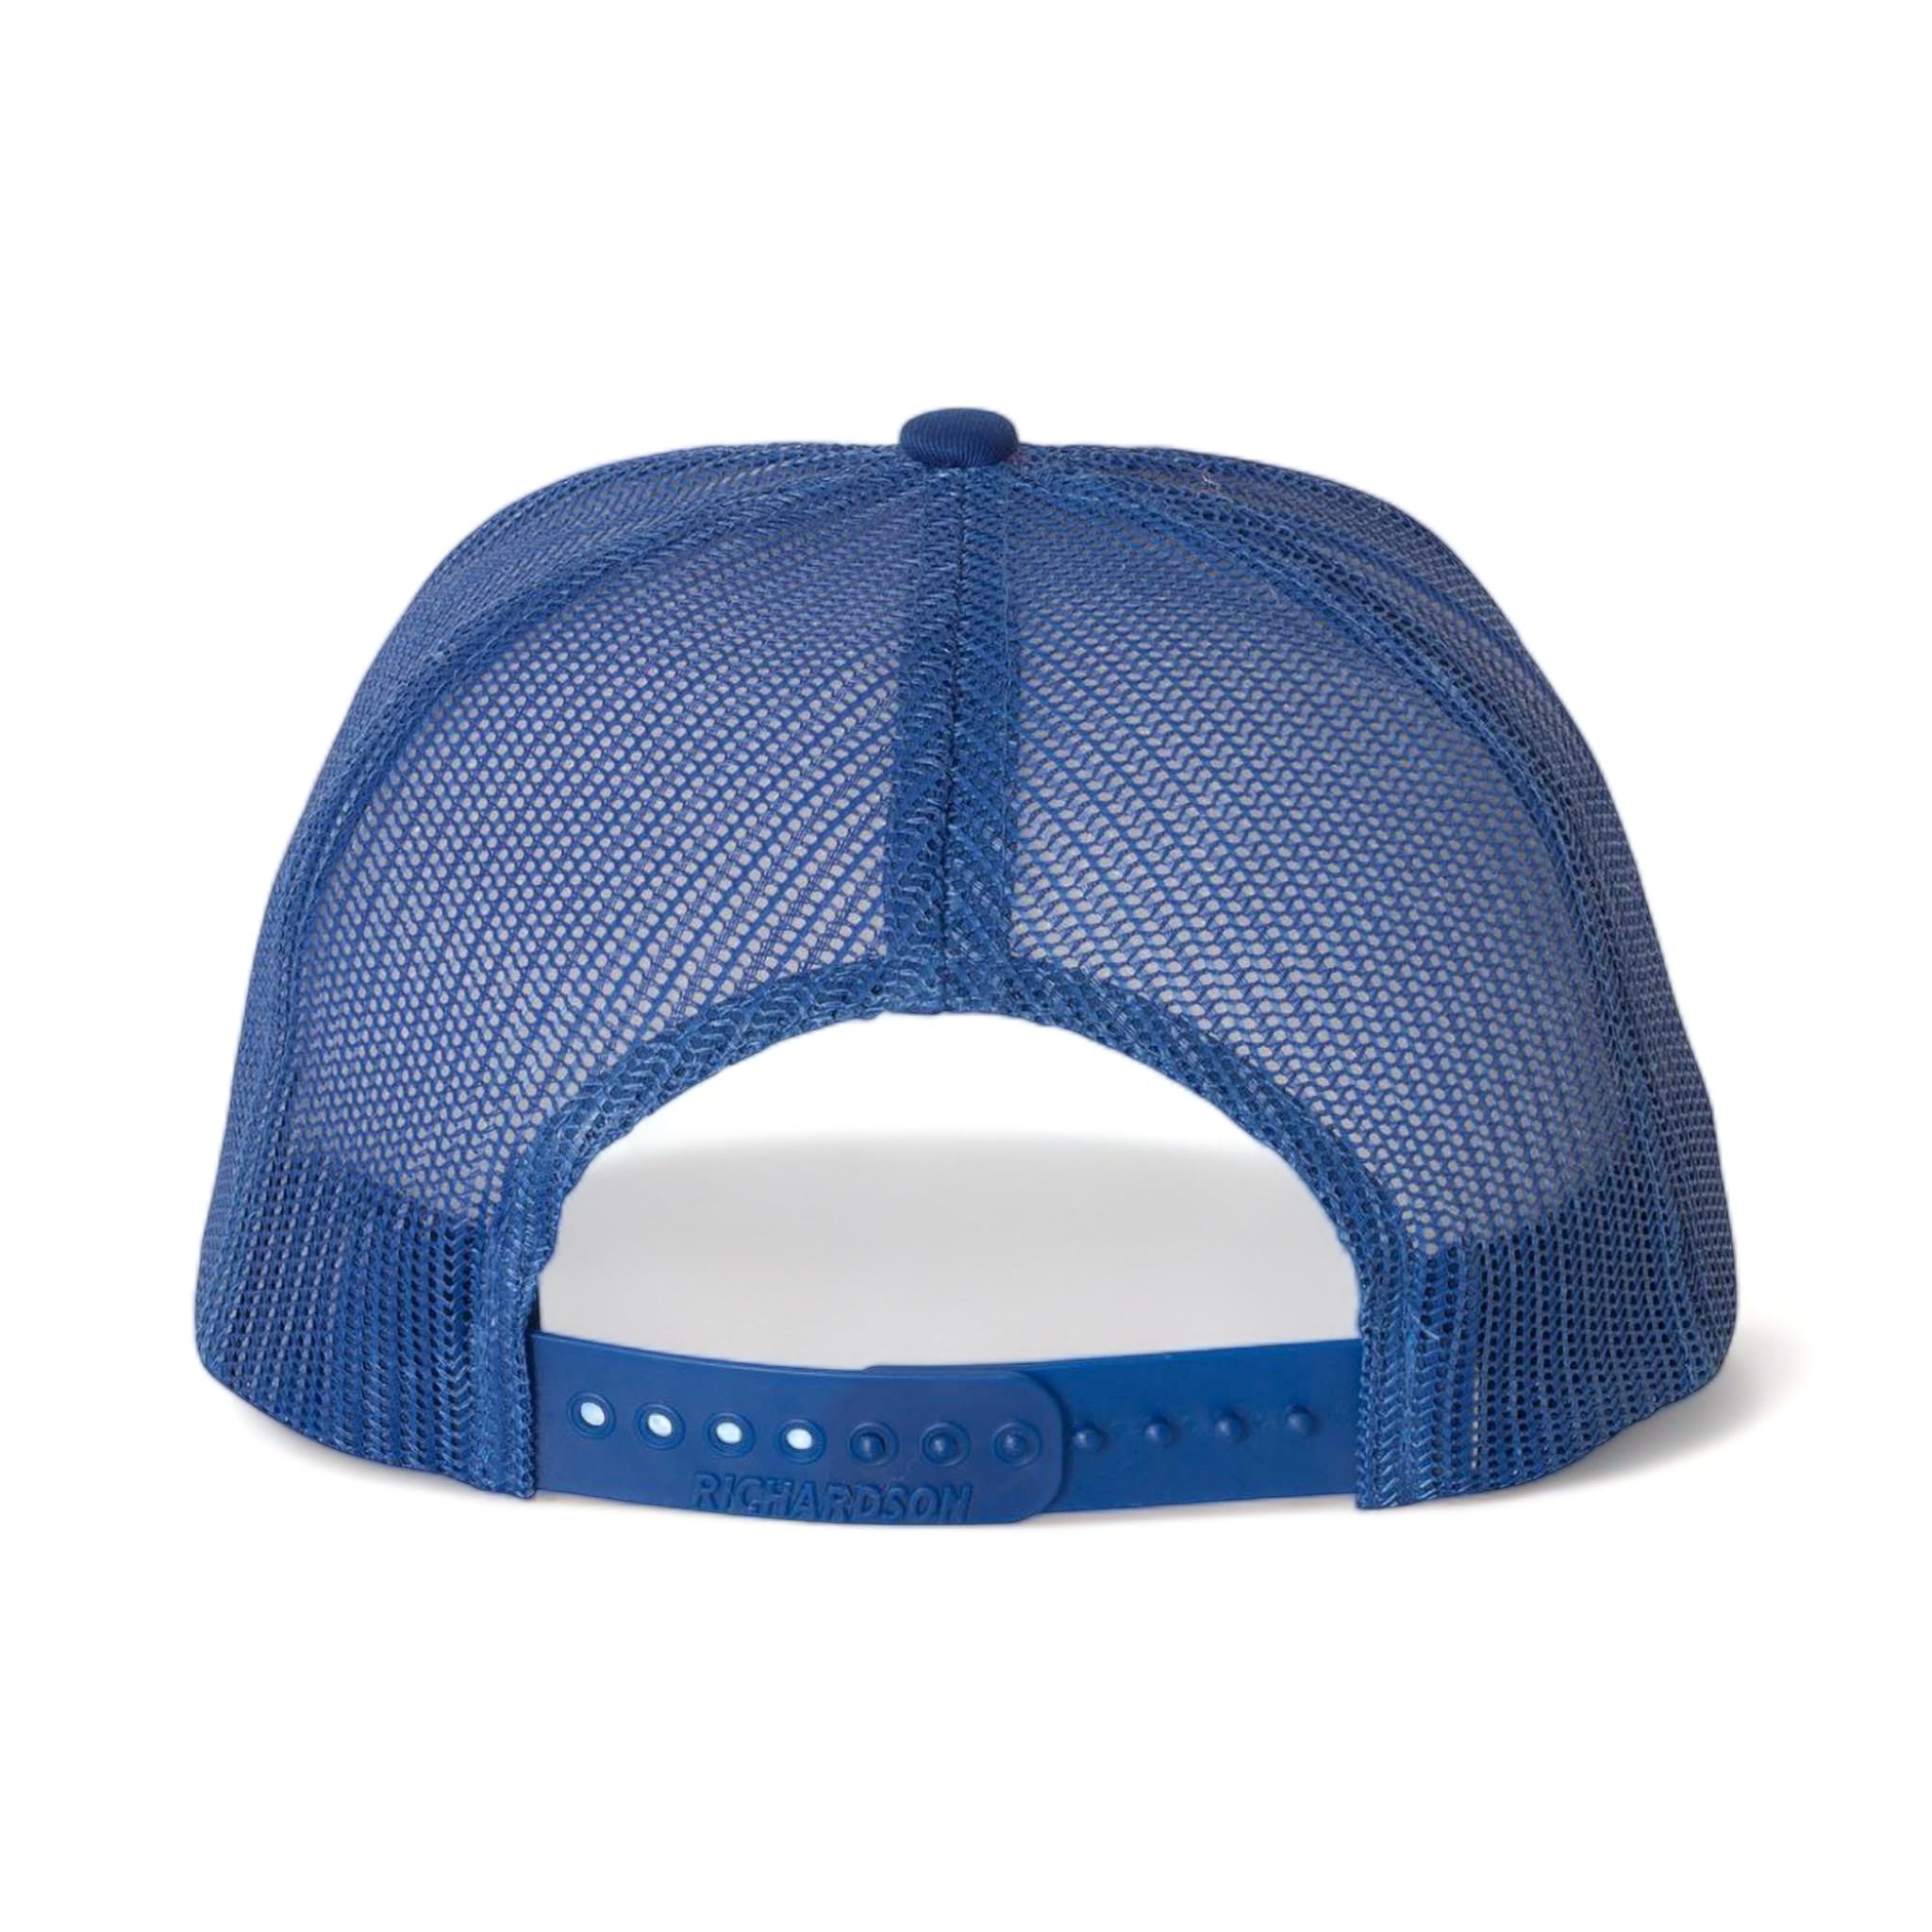 Back view of Richardson 112 custom hat in white and royal